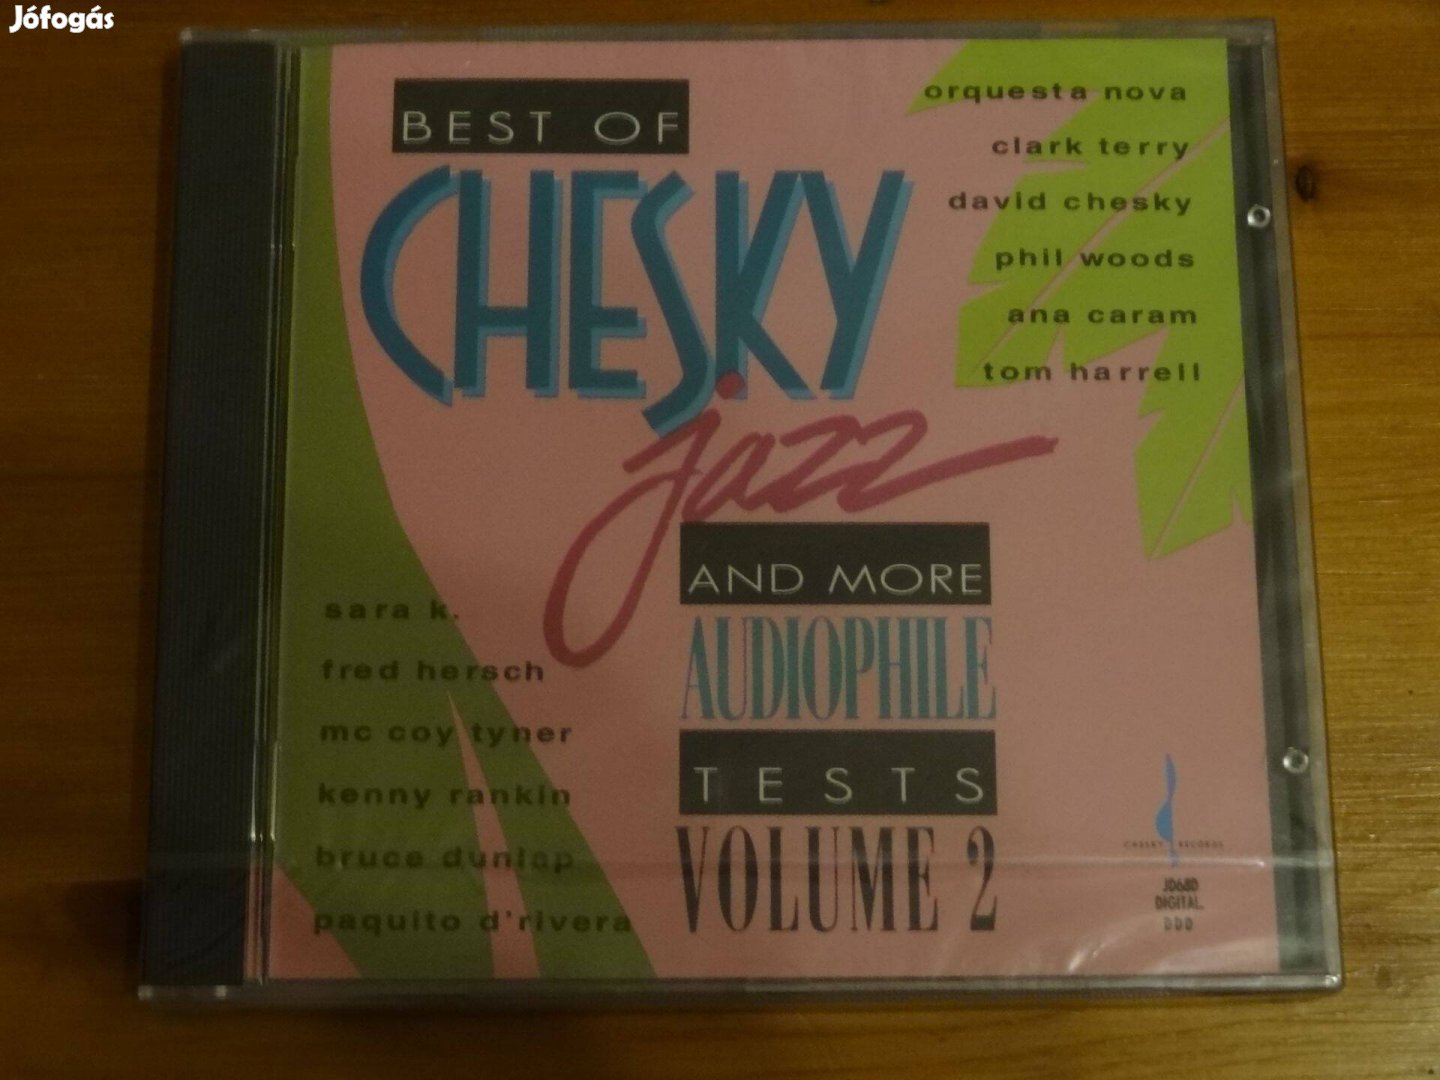 Best of Chesky Jazz and More Audiophile CD Vol.2